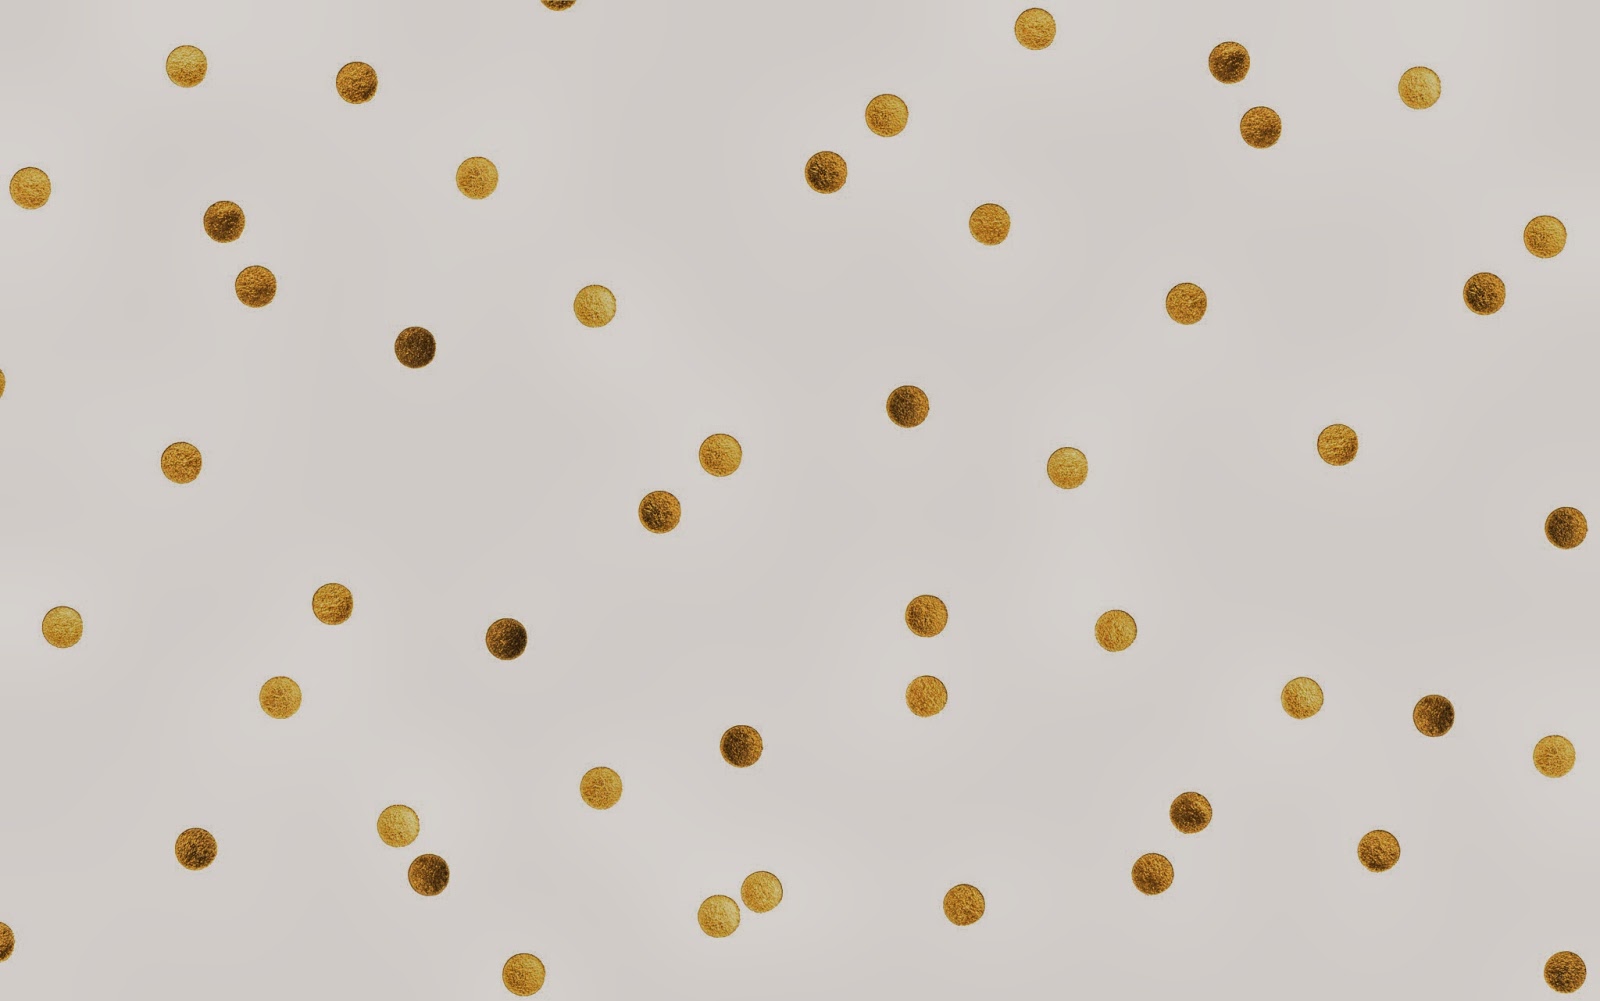 This Gold Confetti Wallpaper Is Currently Adding Style To My